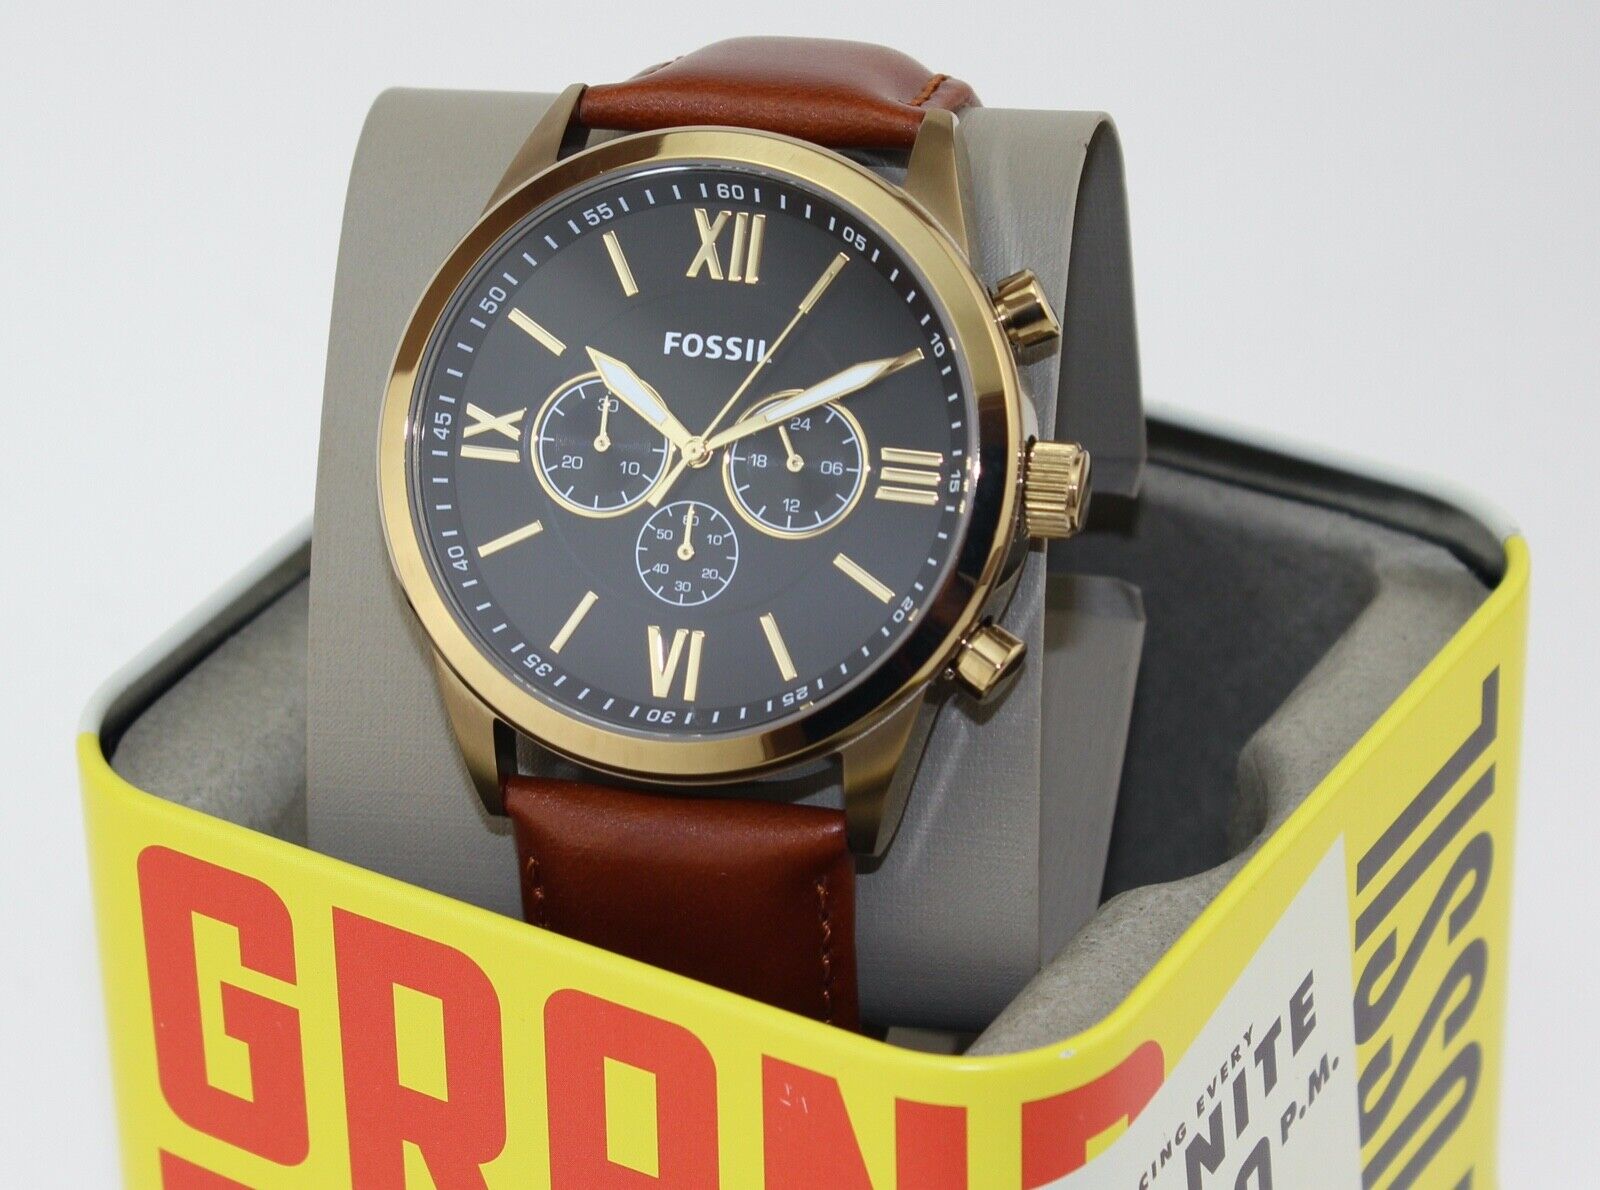 NEW AUTHENTIC FOSSIL FLYNN GOLD BLACK BROWN LEATHER CHRONOGRAPH BQ2261 MEN WATCH